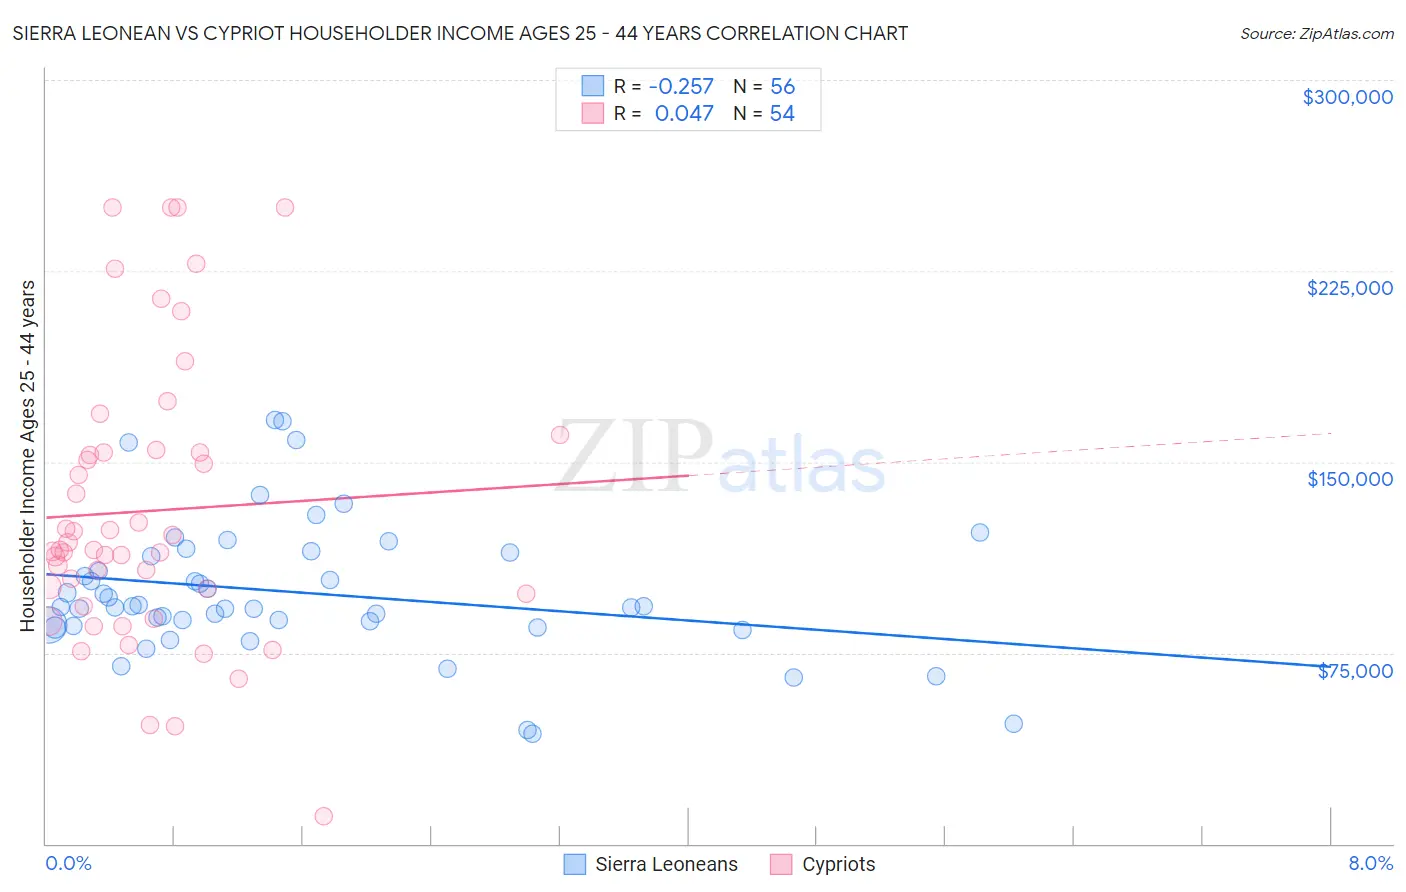 Sierra Leonean vs Cypriot Householder Income Ages 25 - 44 years